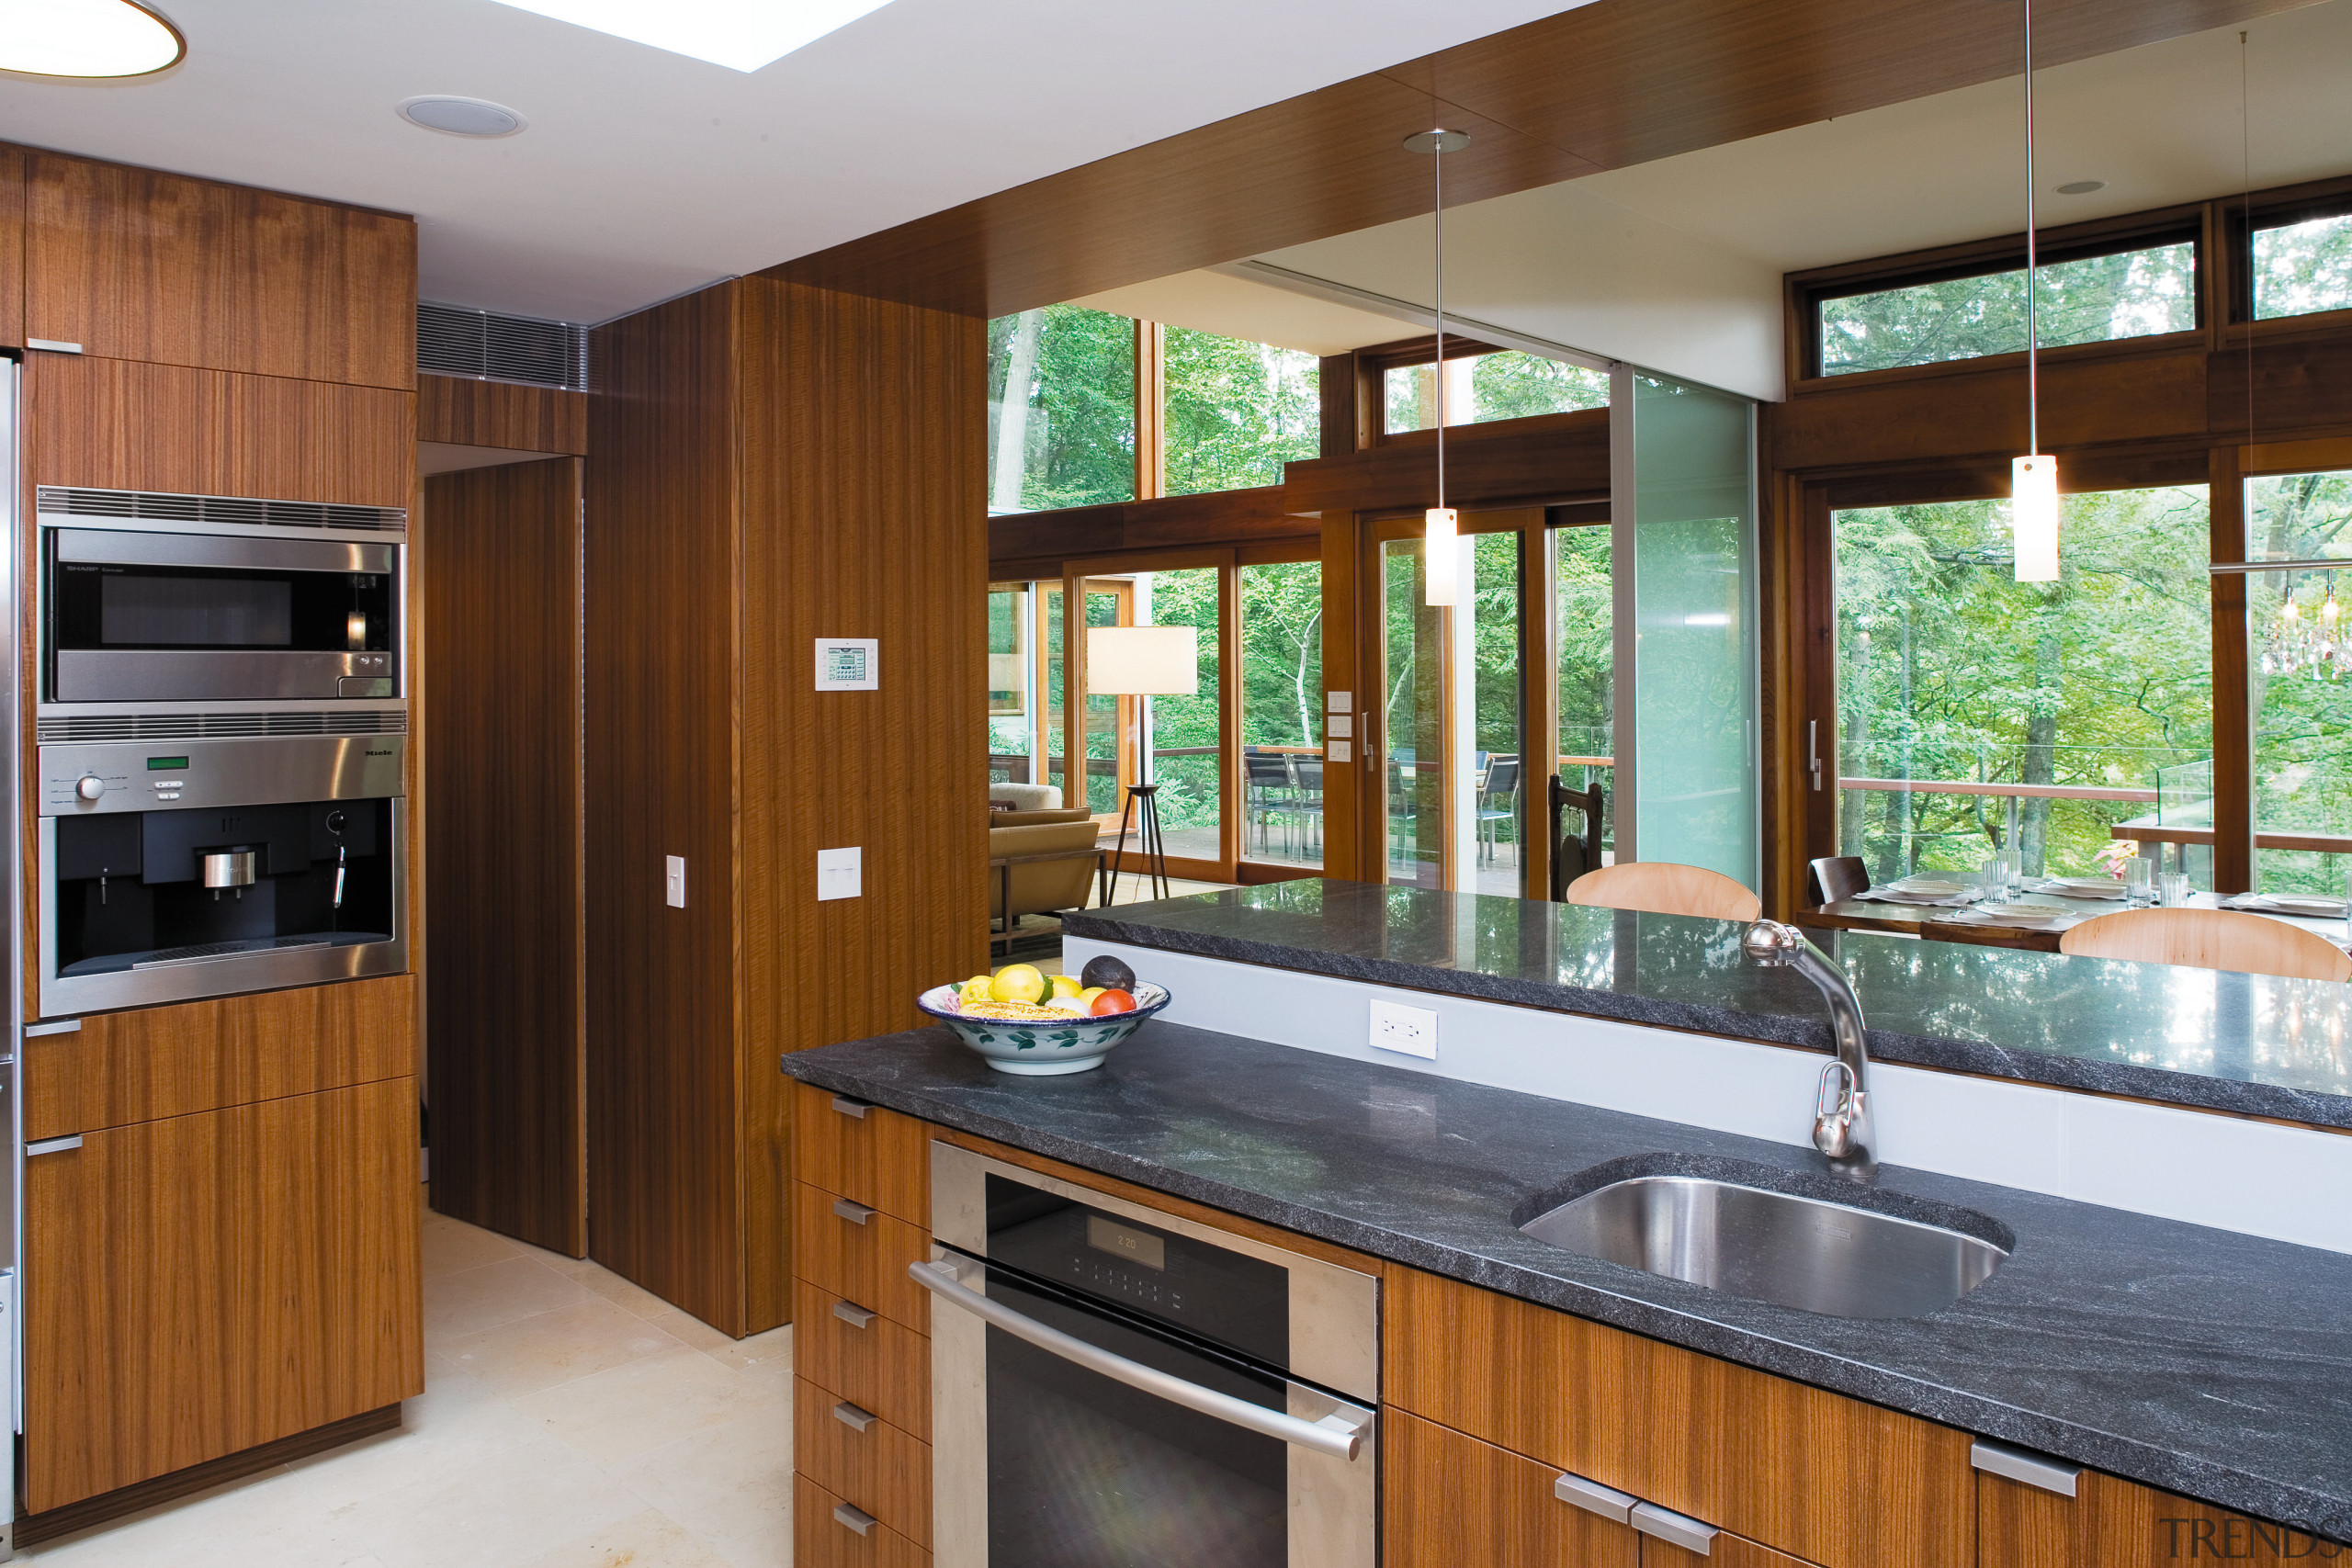 view of the kitchen dining area featuring teak cabinetry, countertop, interior design, kitchen, real estate, room, brown